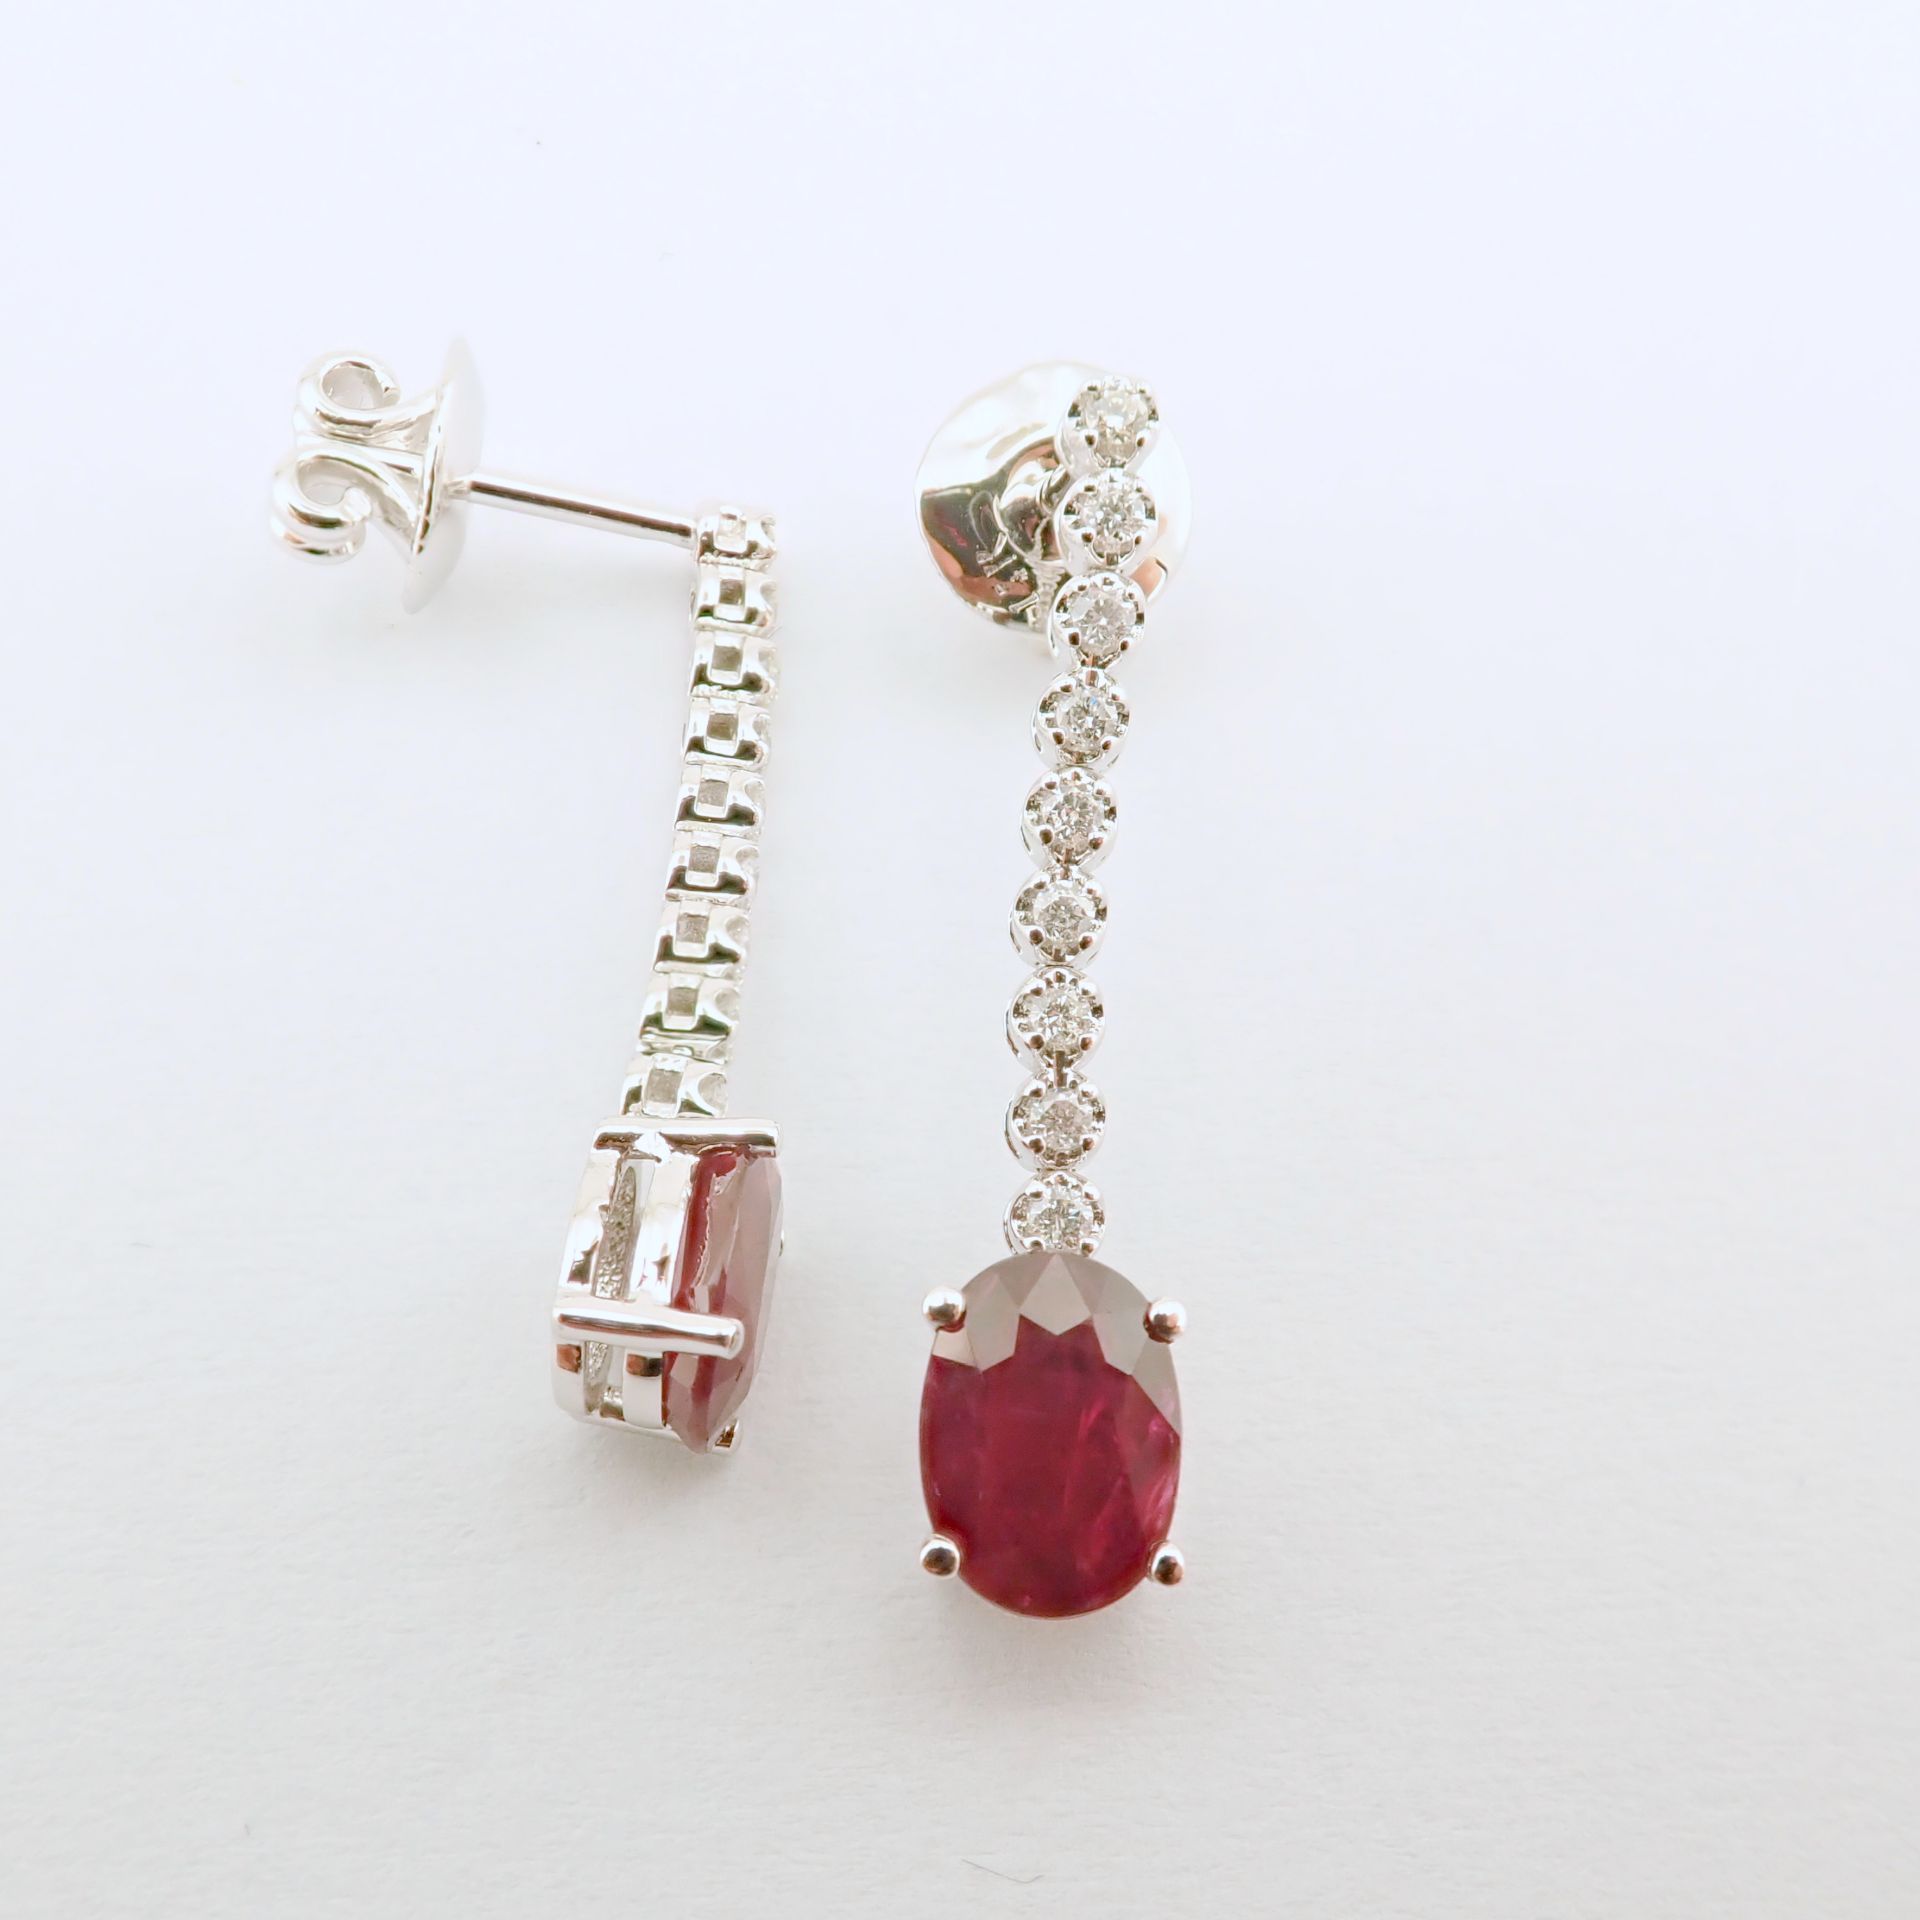 14K White Gold Diamond and Rubby Earring - Image 5 of 8